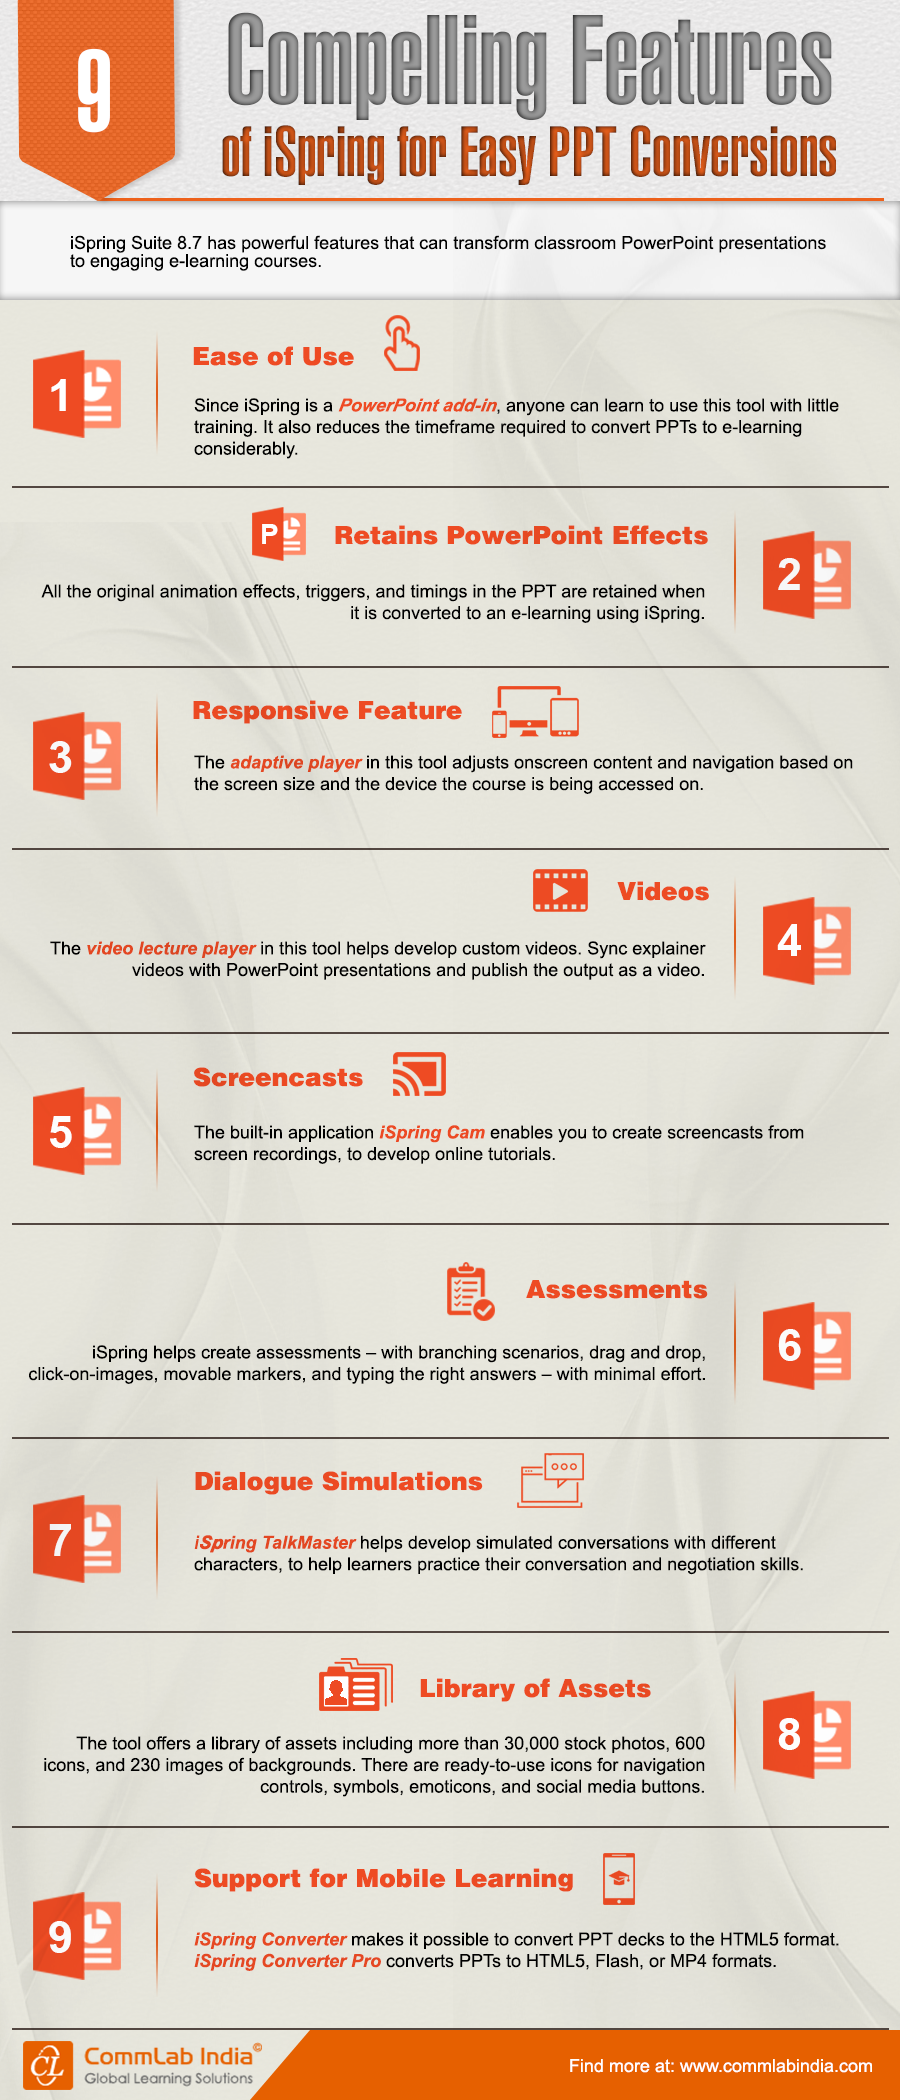 9 Compelling Features of iSpring for Easy PPT Conversions [Infographic]